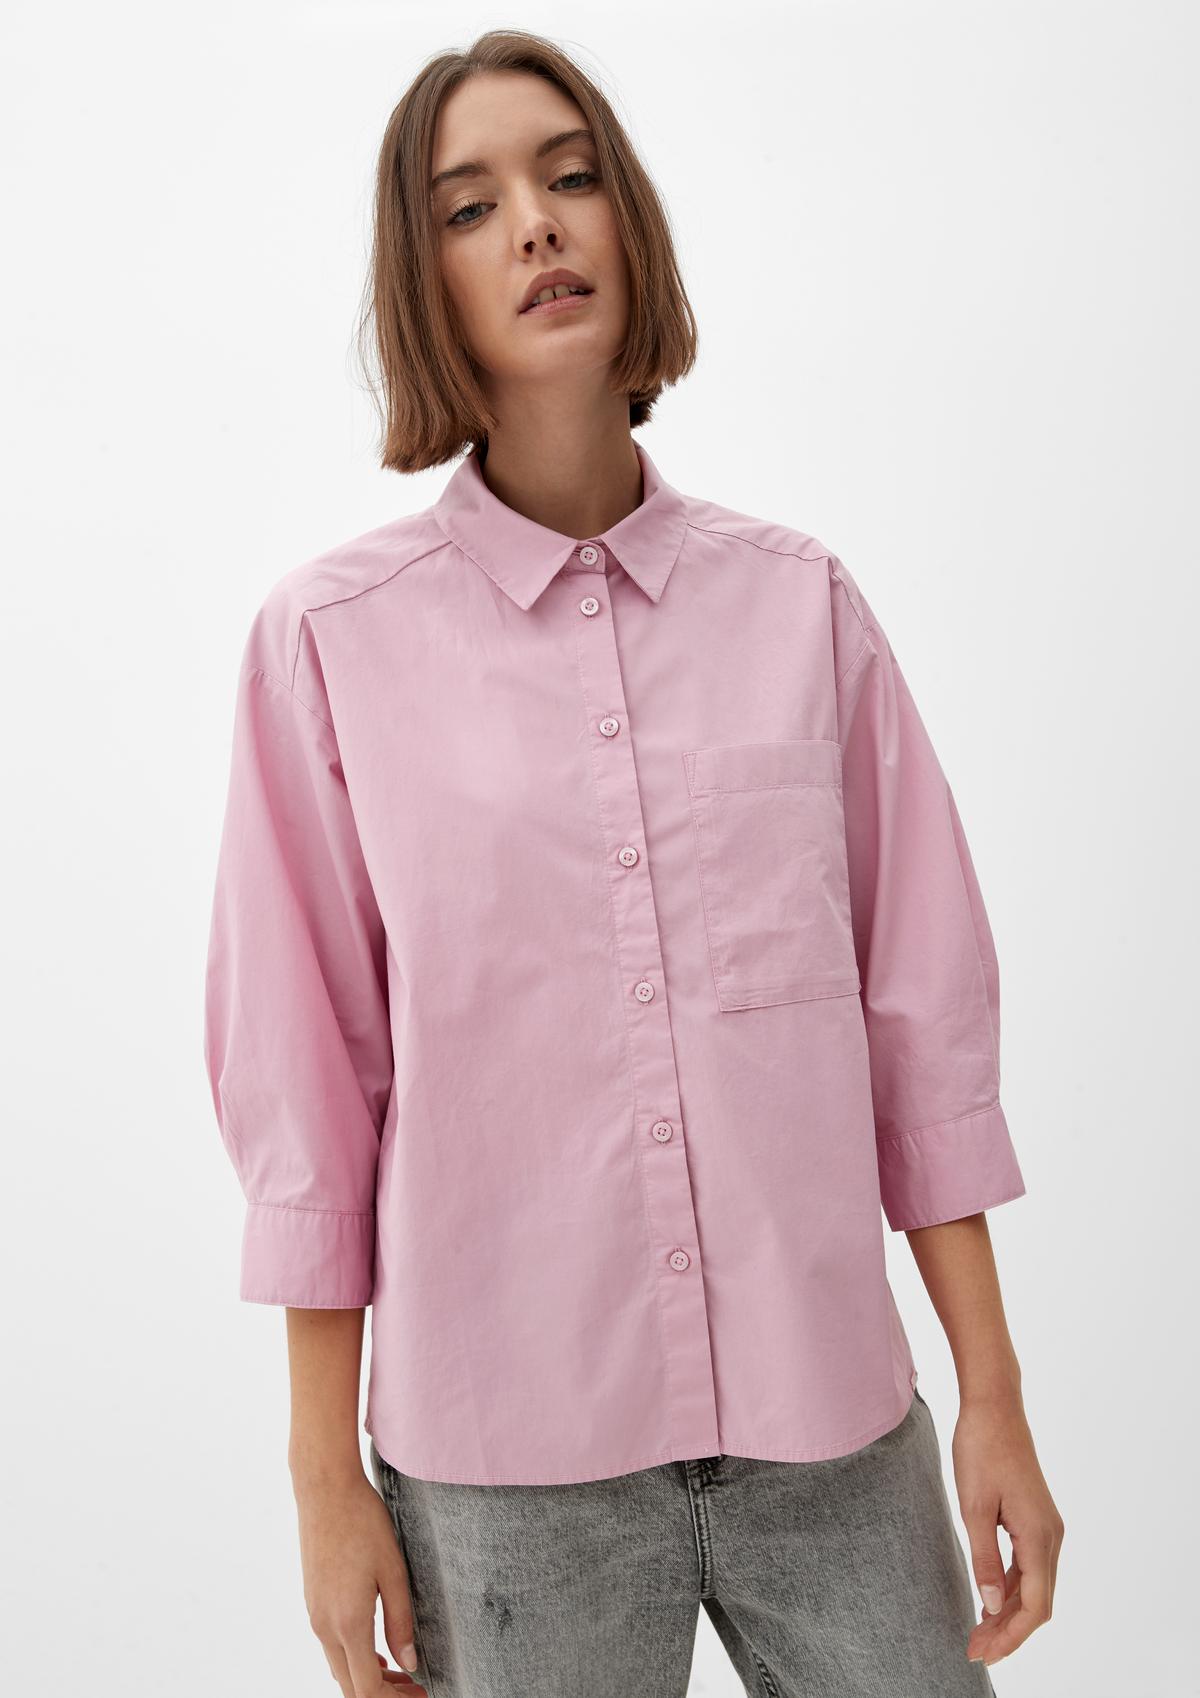 Blouse in a loose fit - sleeves with 3/4-length white